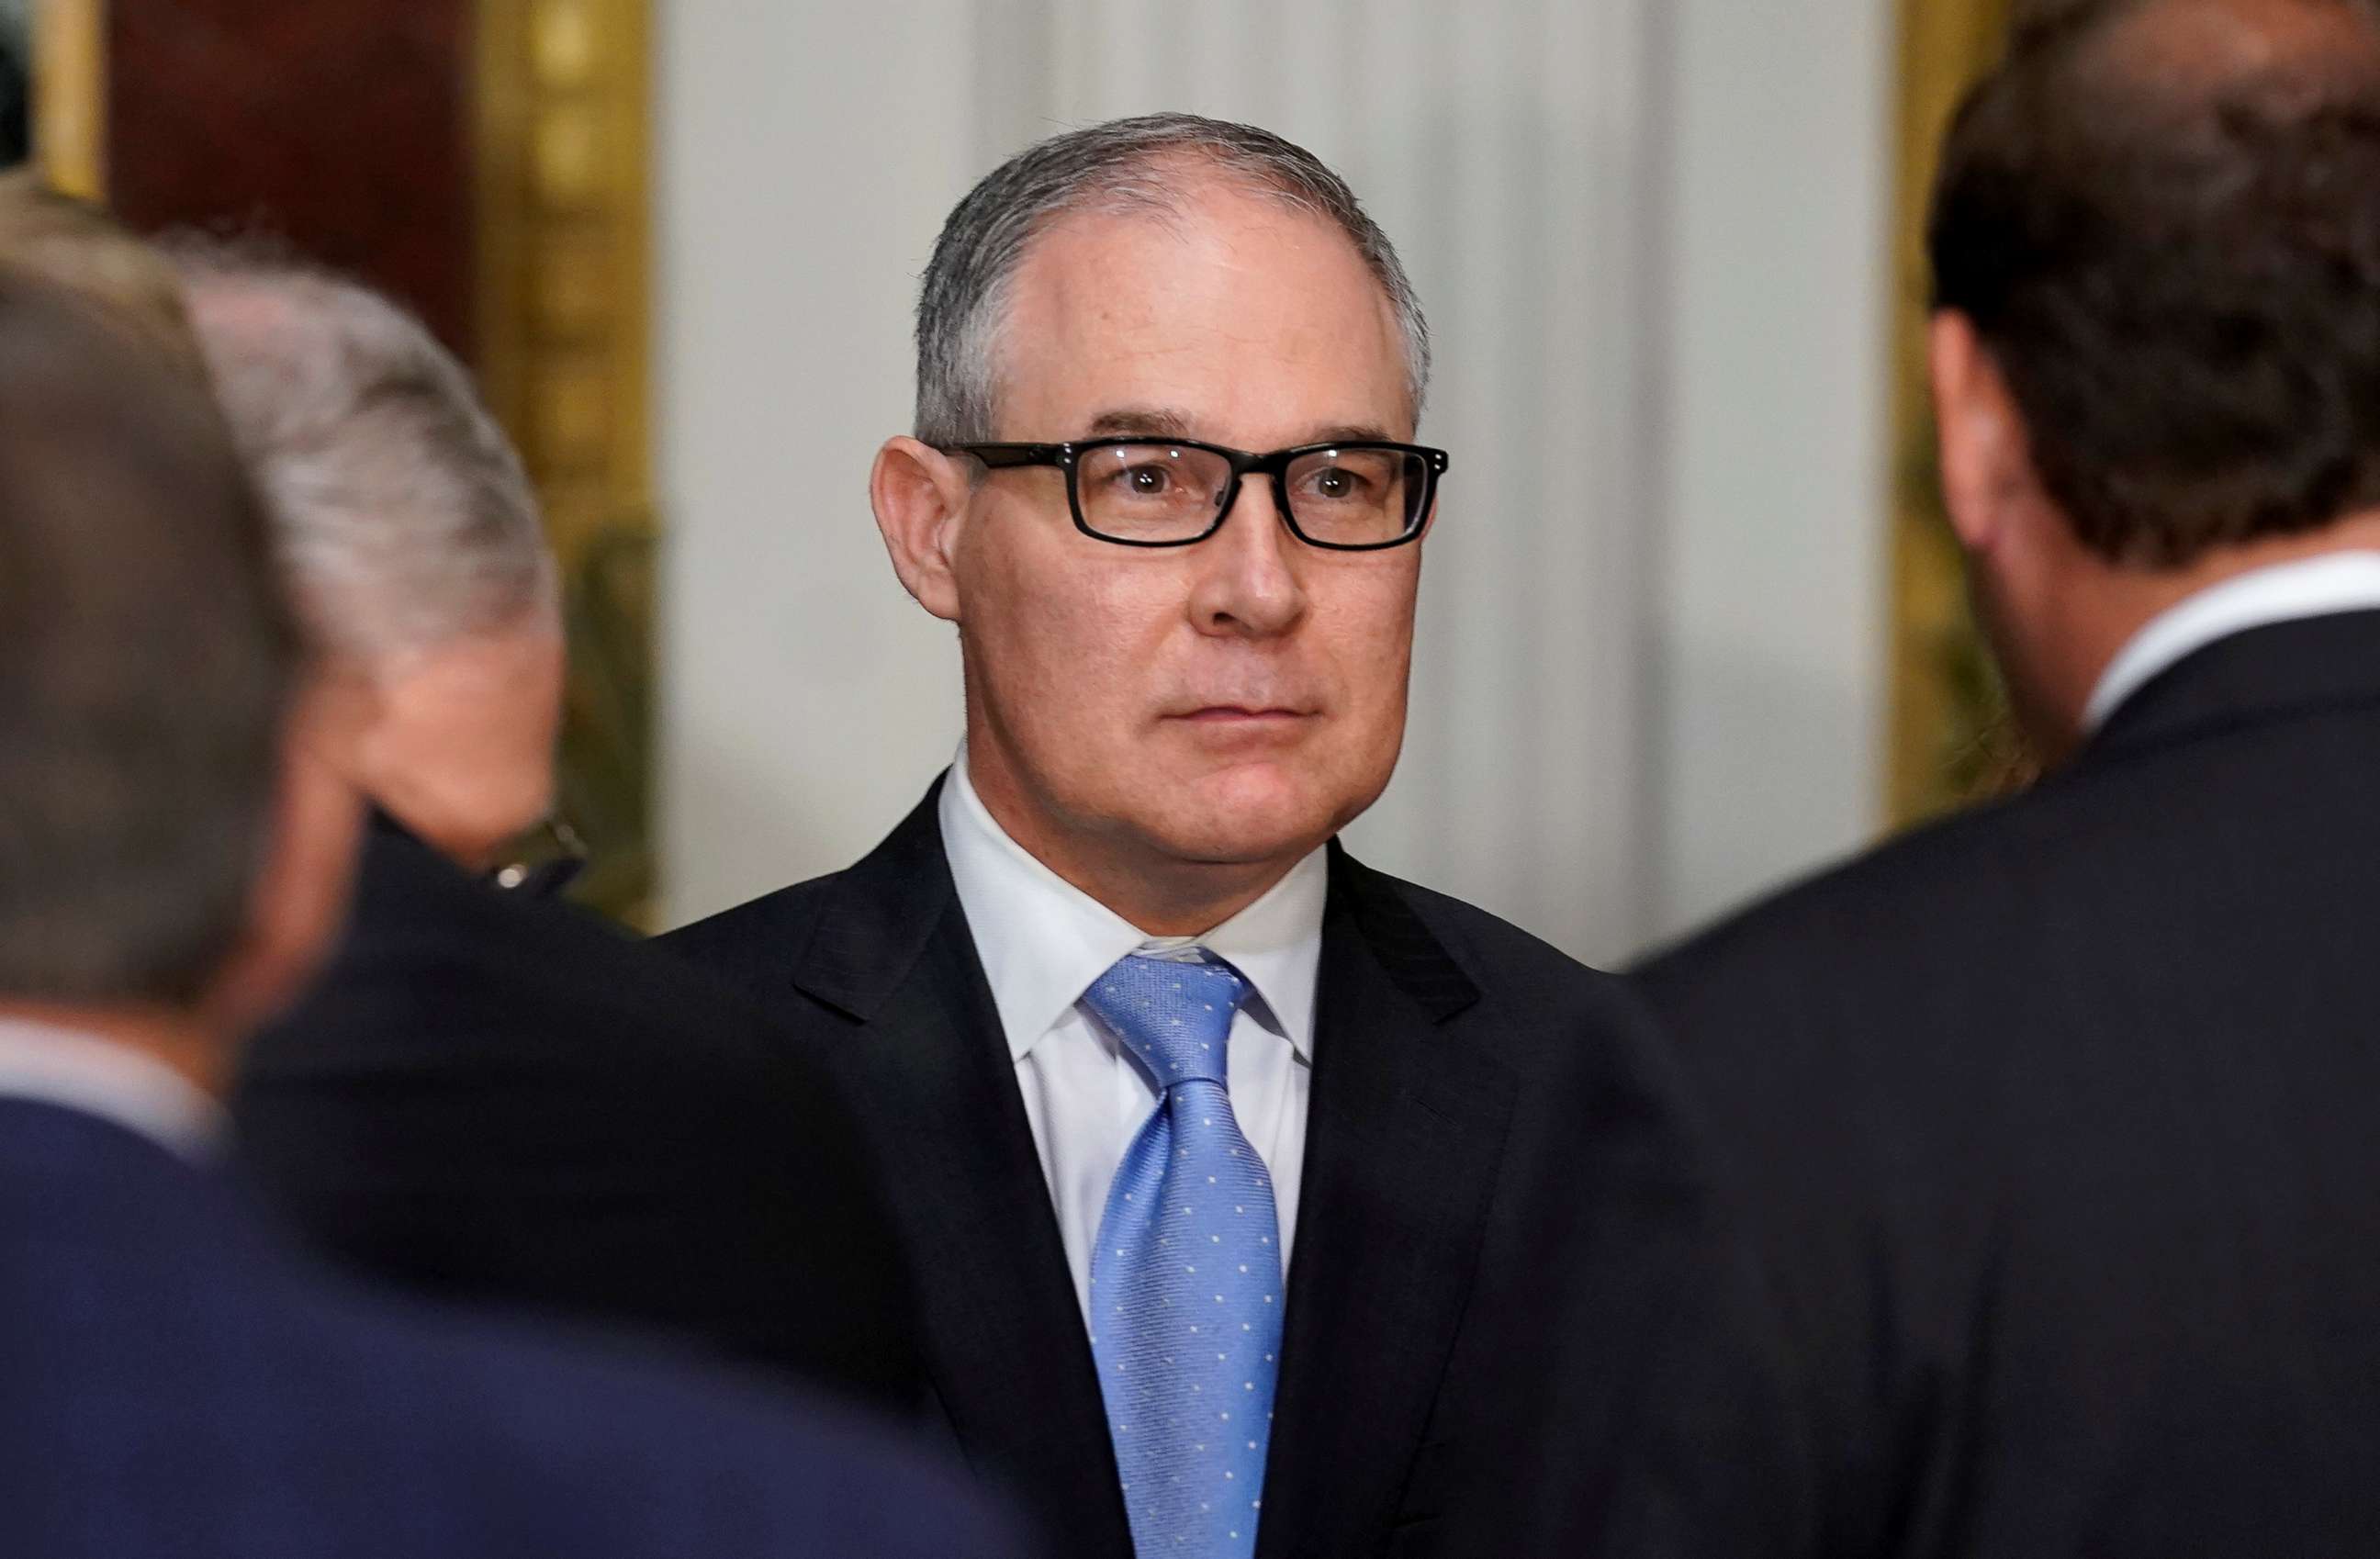 PHOTO: Administrator of the Environmental Protection Agency Scott Pruitt stands after the swearing-in ceremony for US Ambassador to Canada Kelly Knight Craft in Washington, D.C., Sept. 26, 2017.  